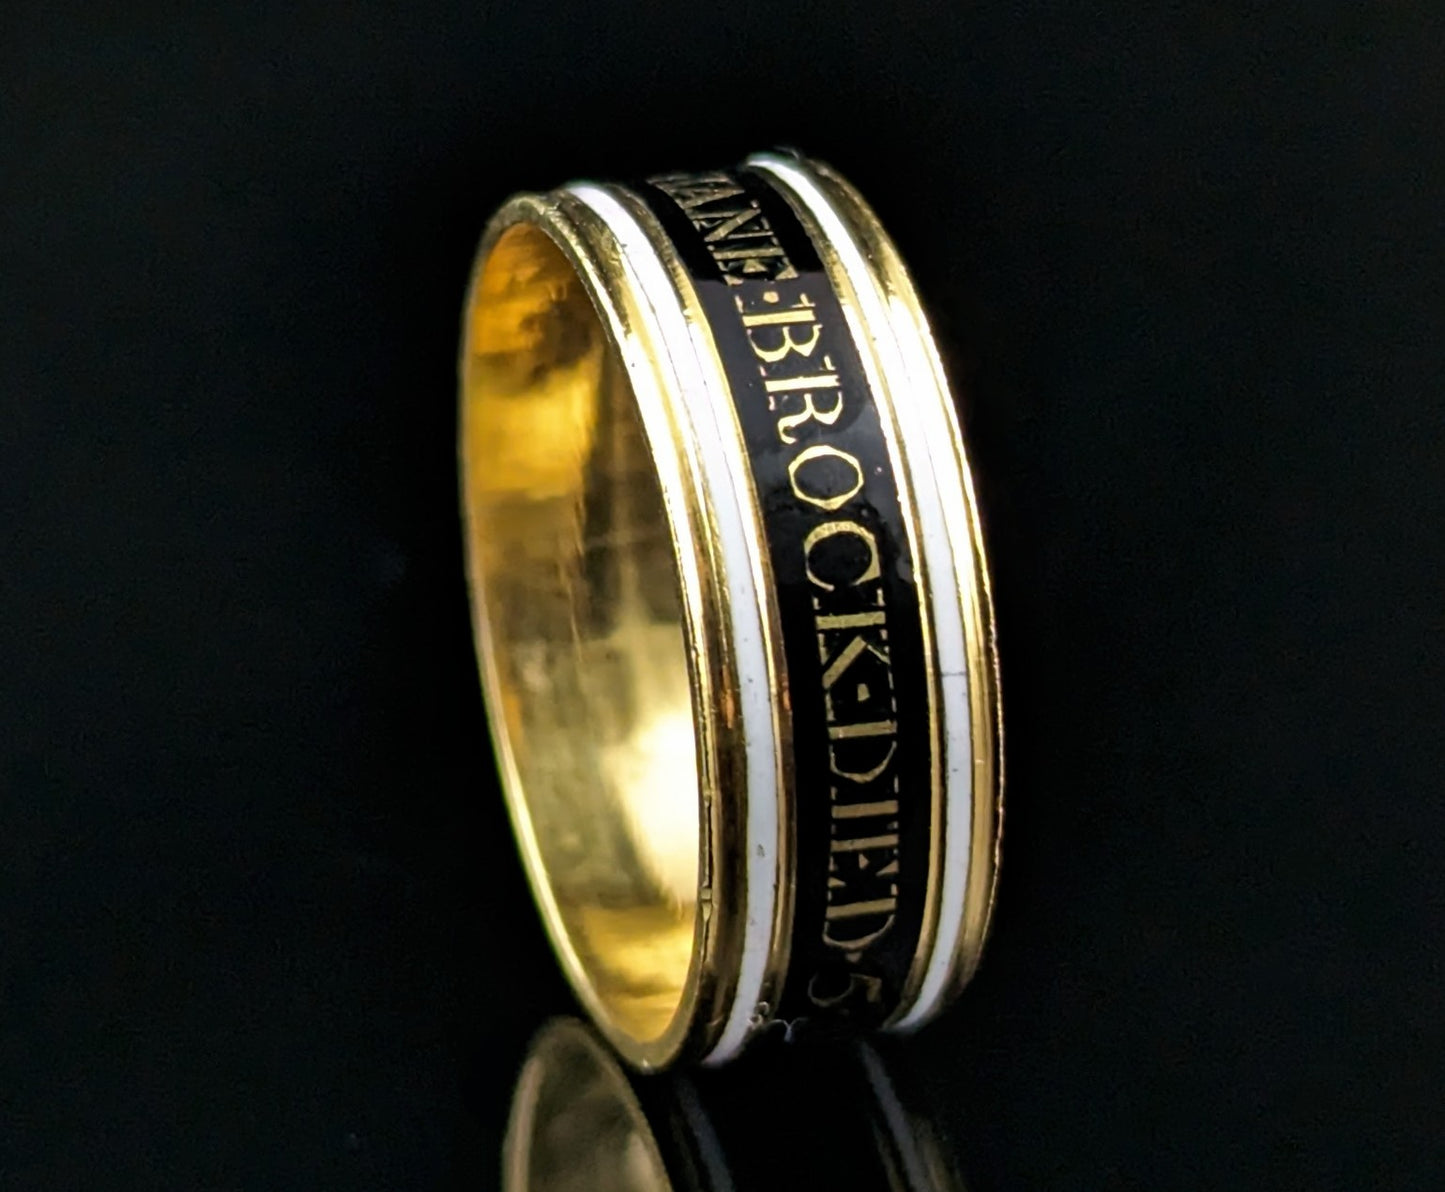 Antique Georgian mourning band ring, enamelled 22ct gold, 18th century